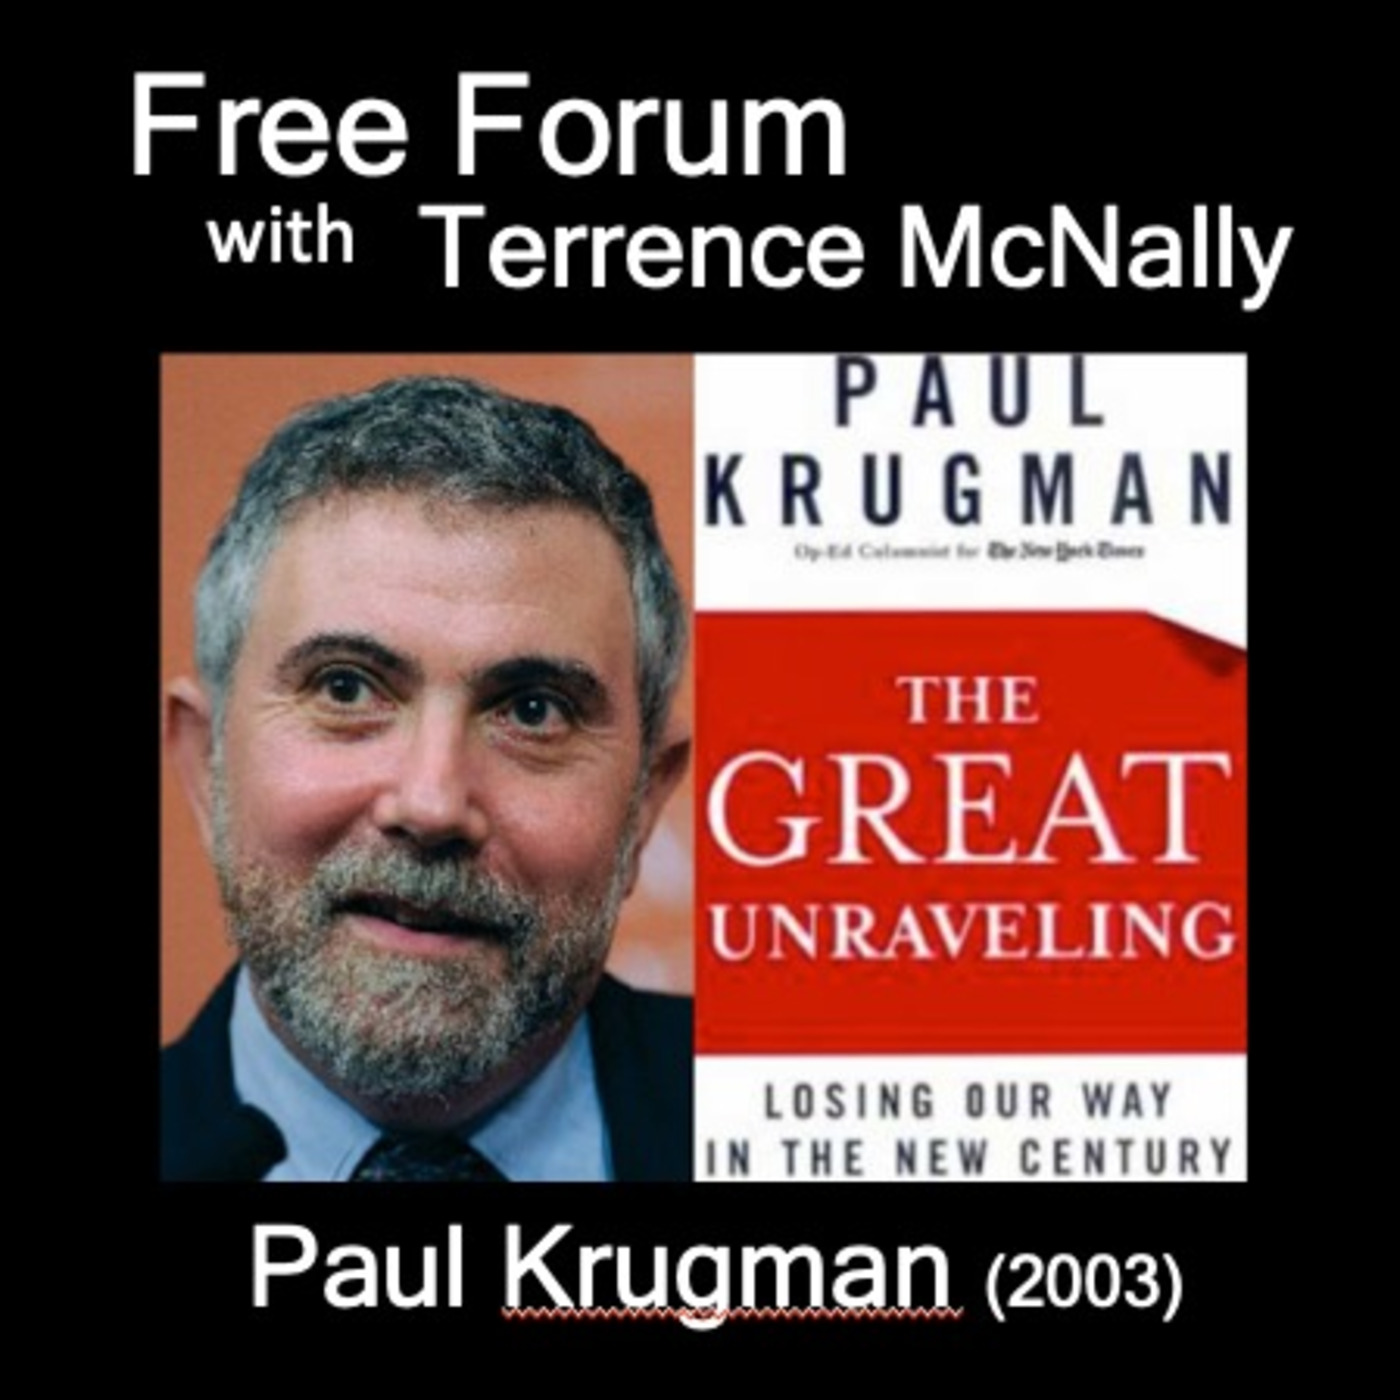 How did we get here? PAUL KRUGMAN, The Great Unraveling  (2003)